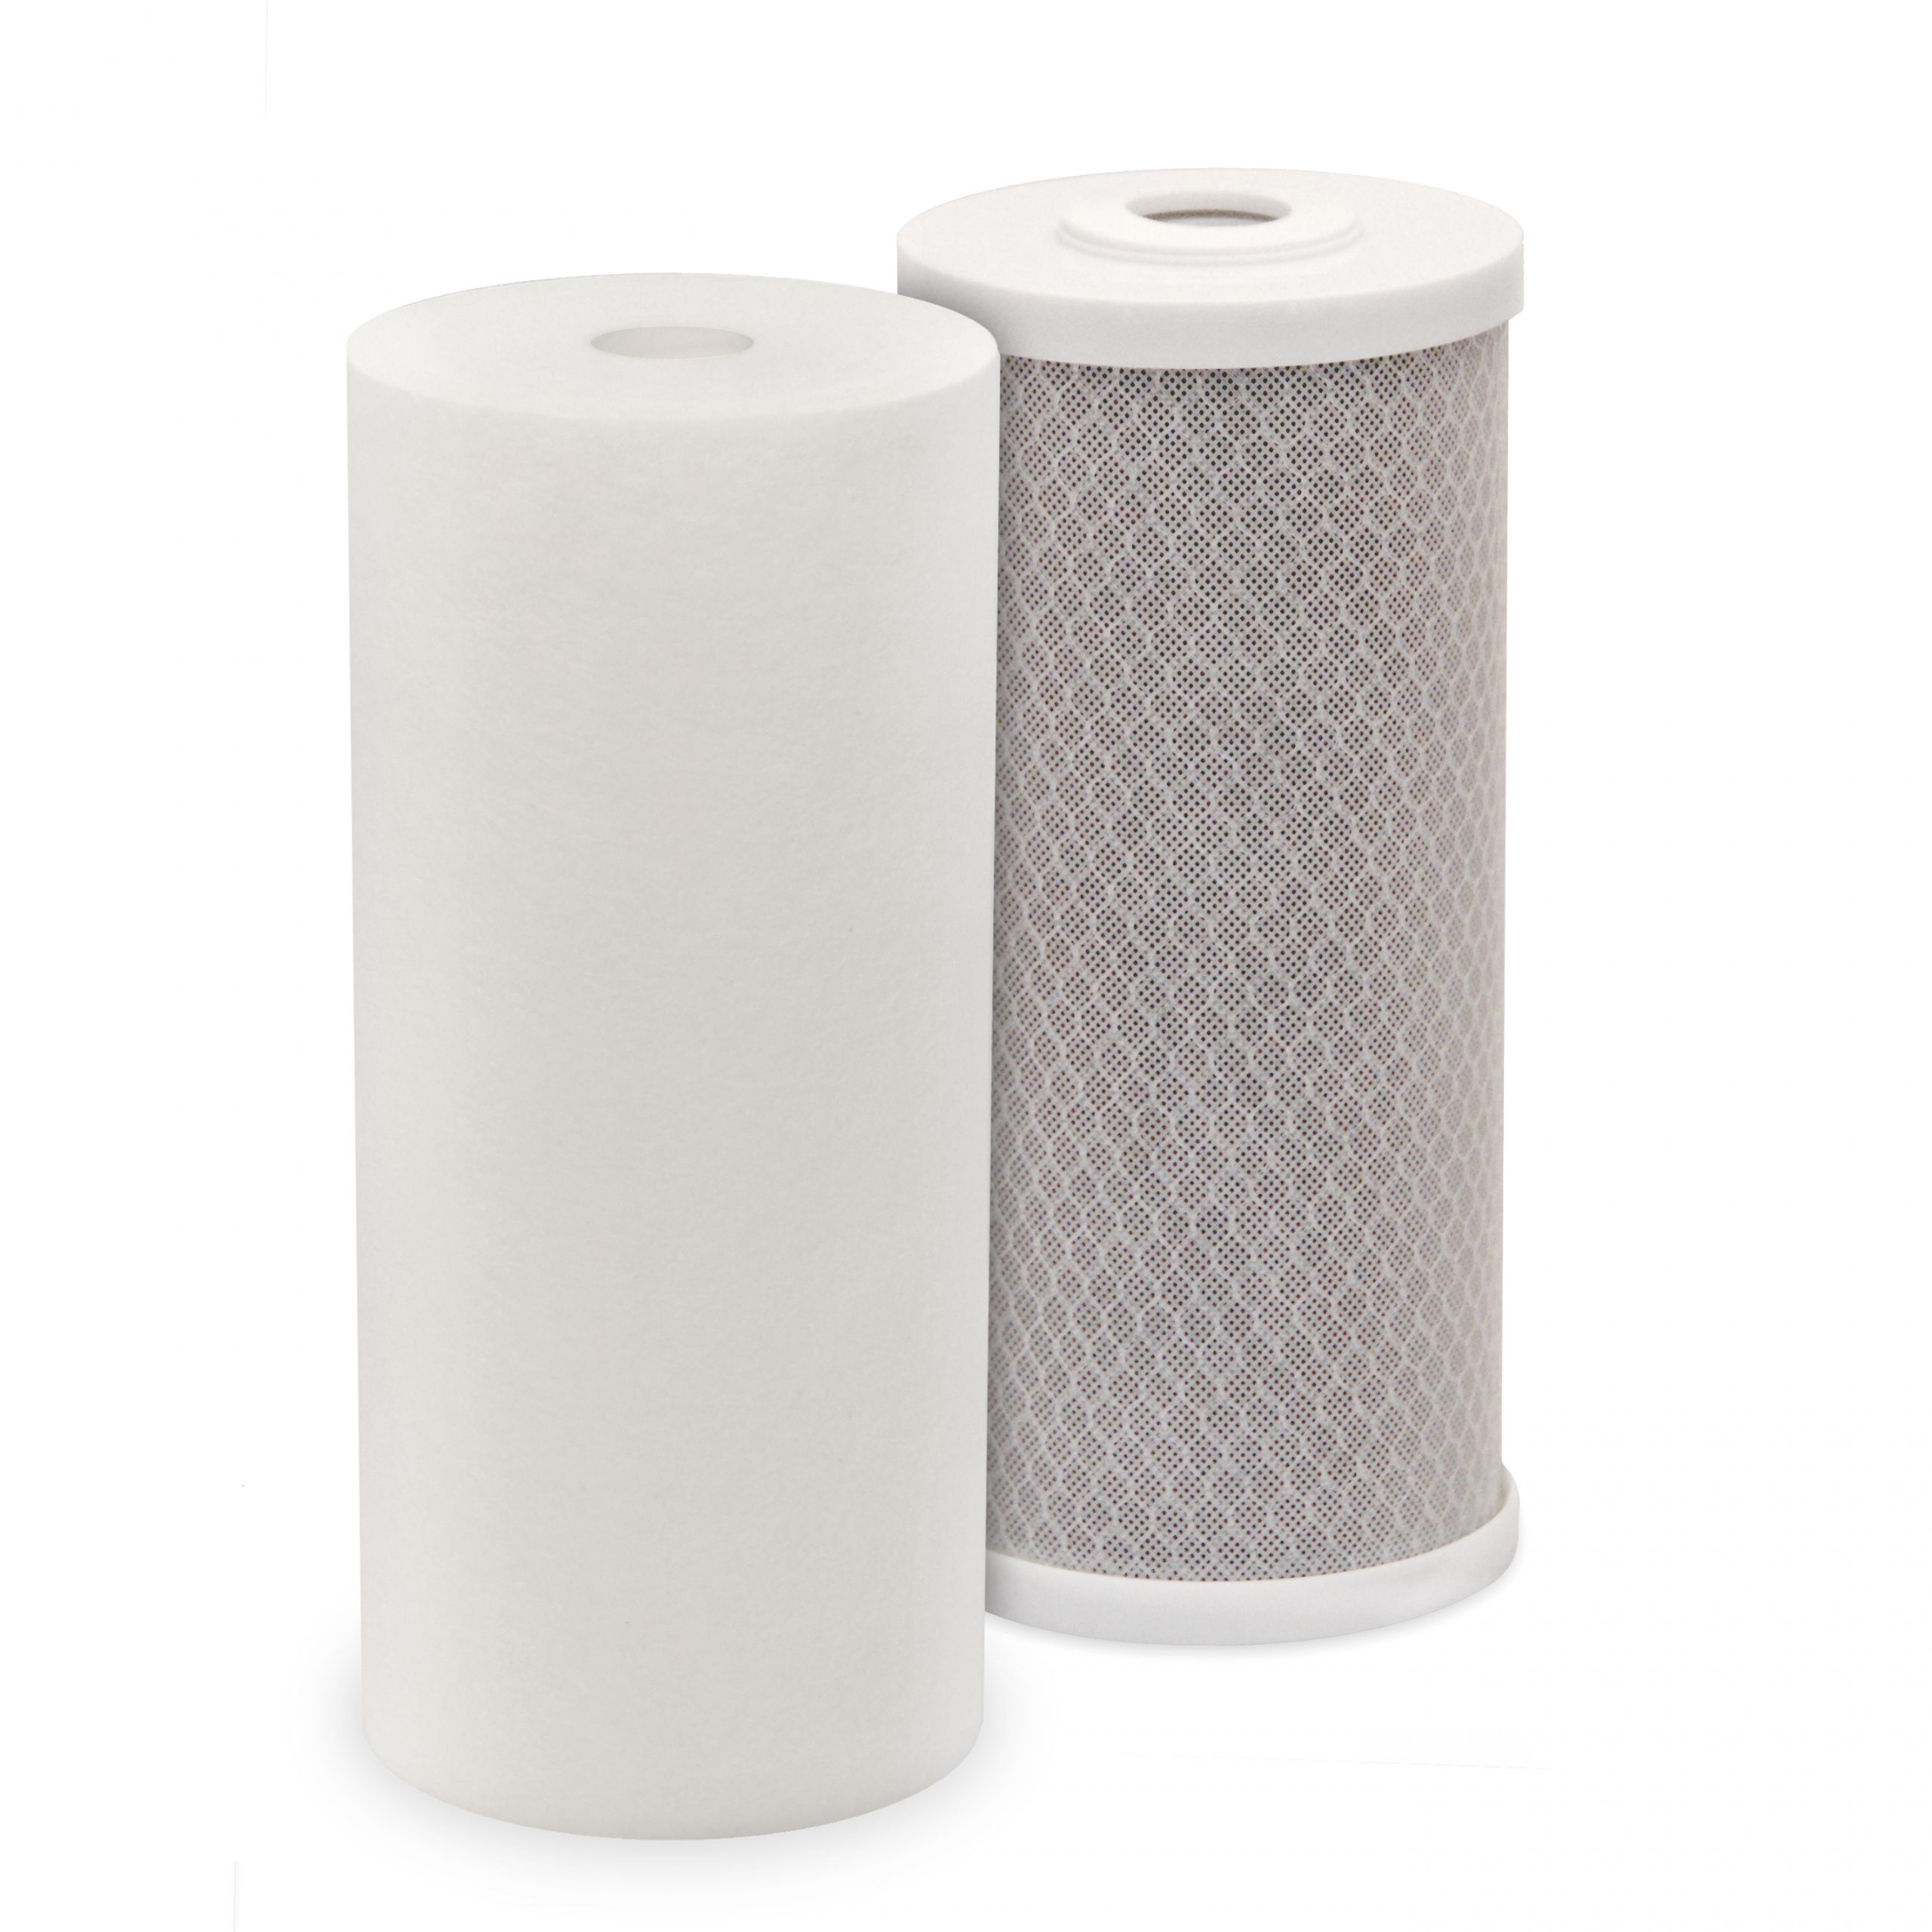 SET OF FILTER CARTRIDGES FOR HRV WATER FILTRATION SYSTEMS